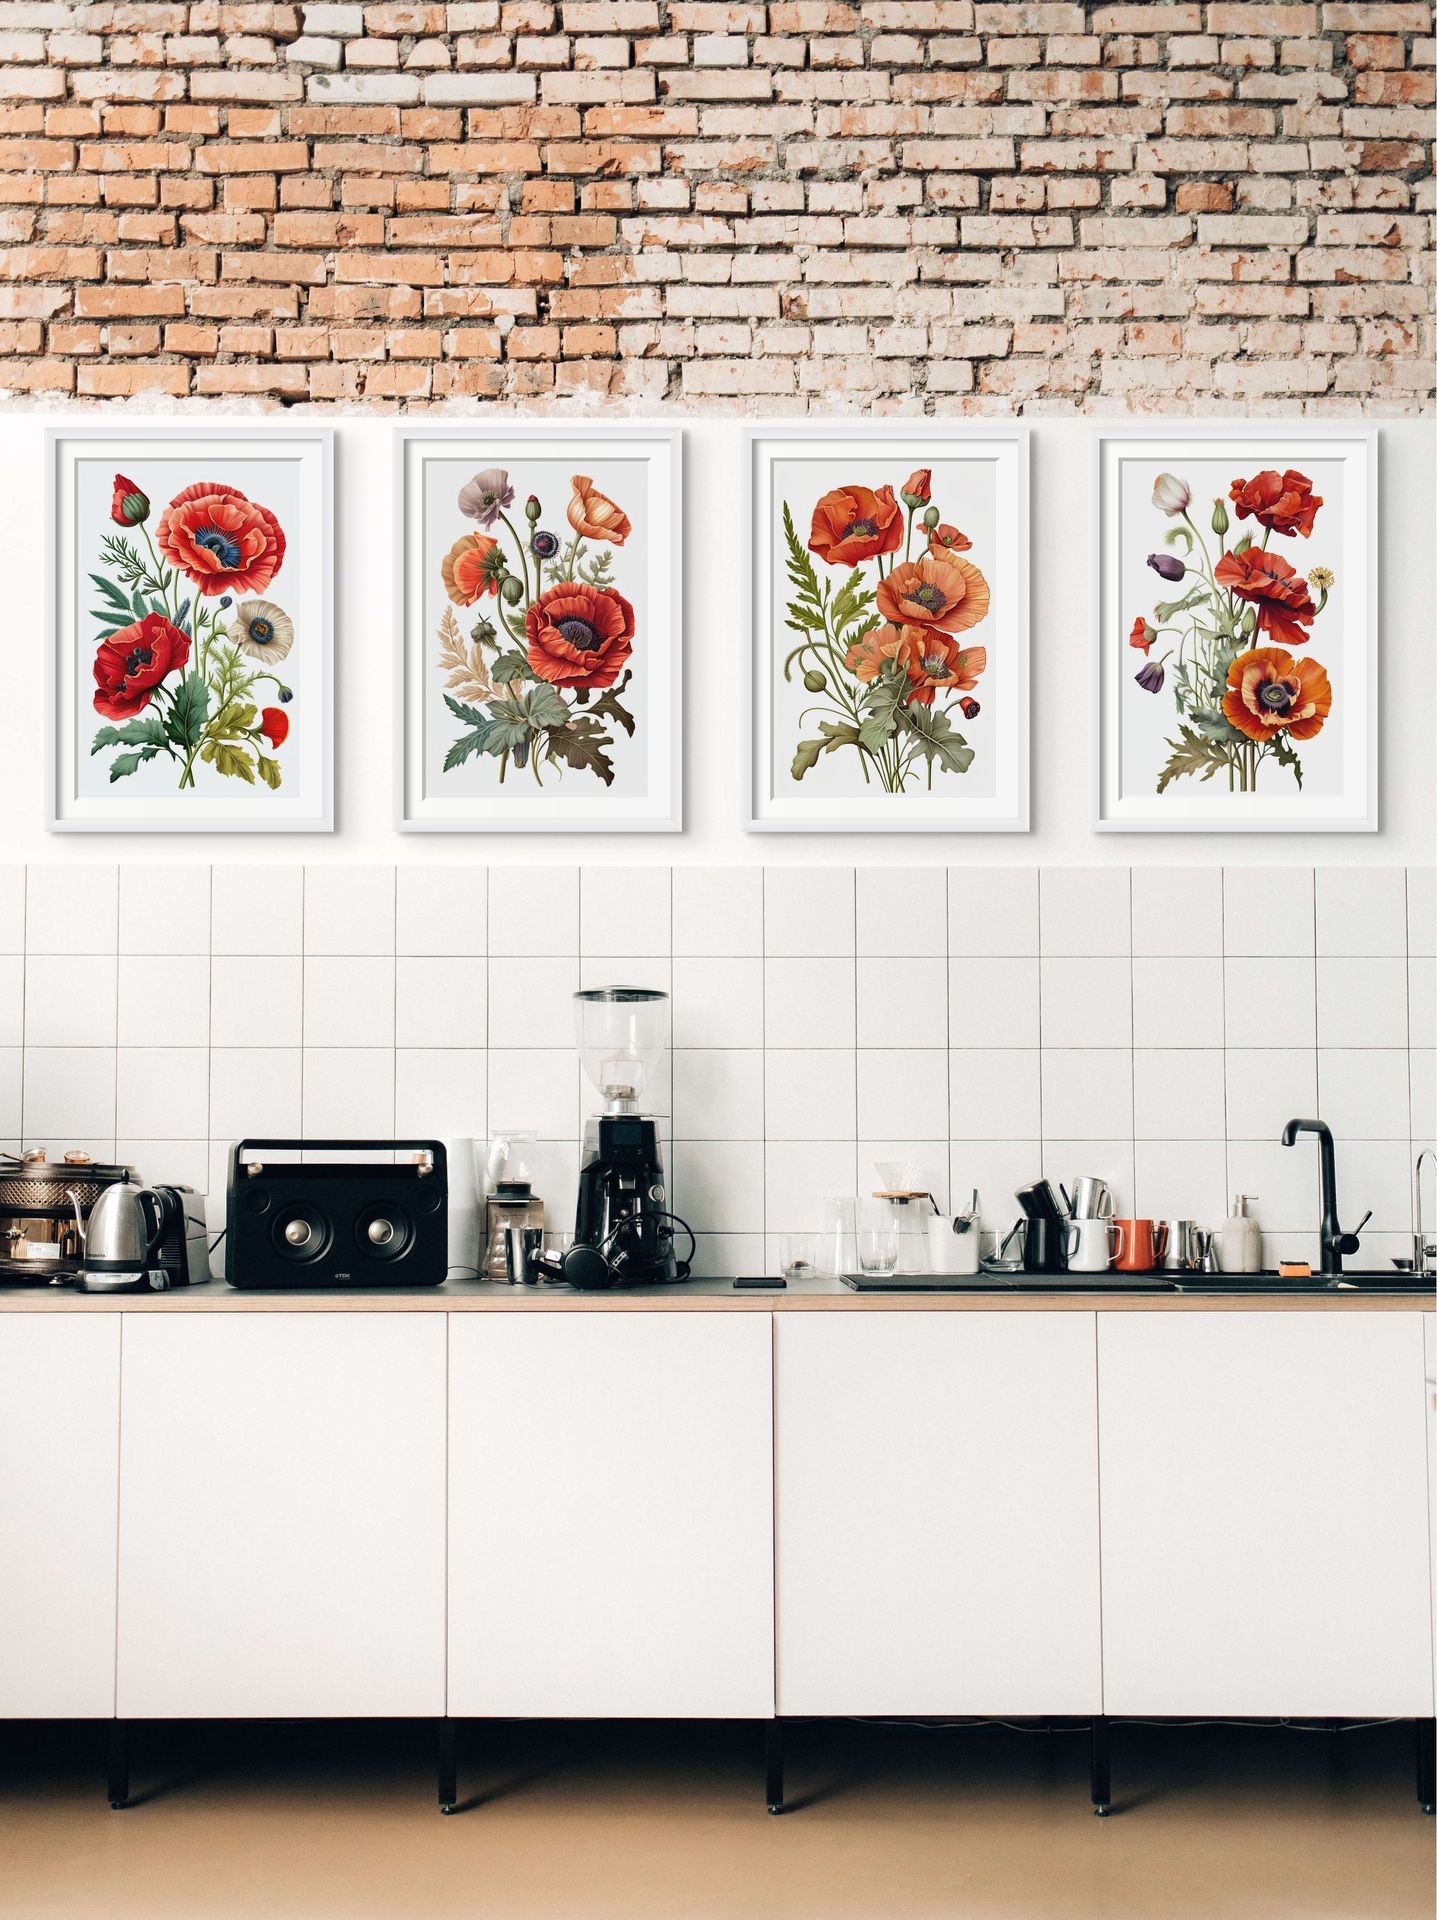 Say Goodbye to Boring Walls: Enhance Your Space with Digital Art Prints